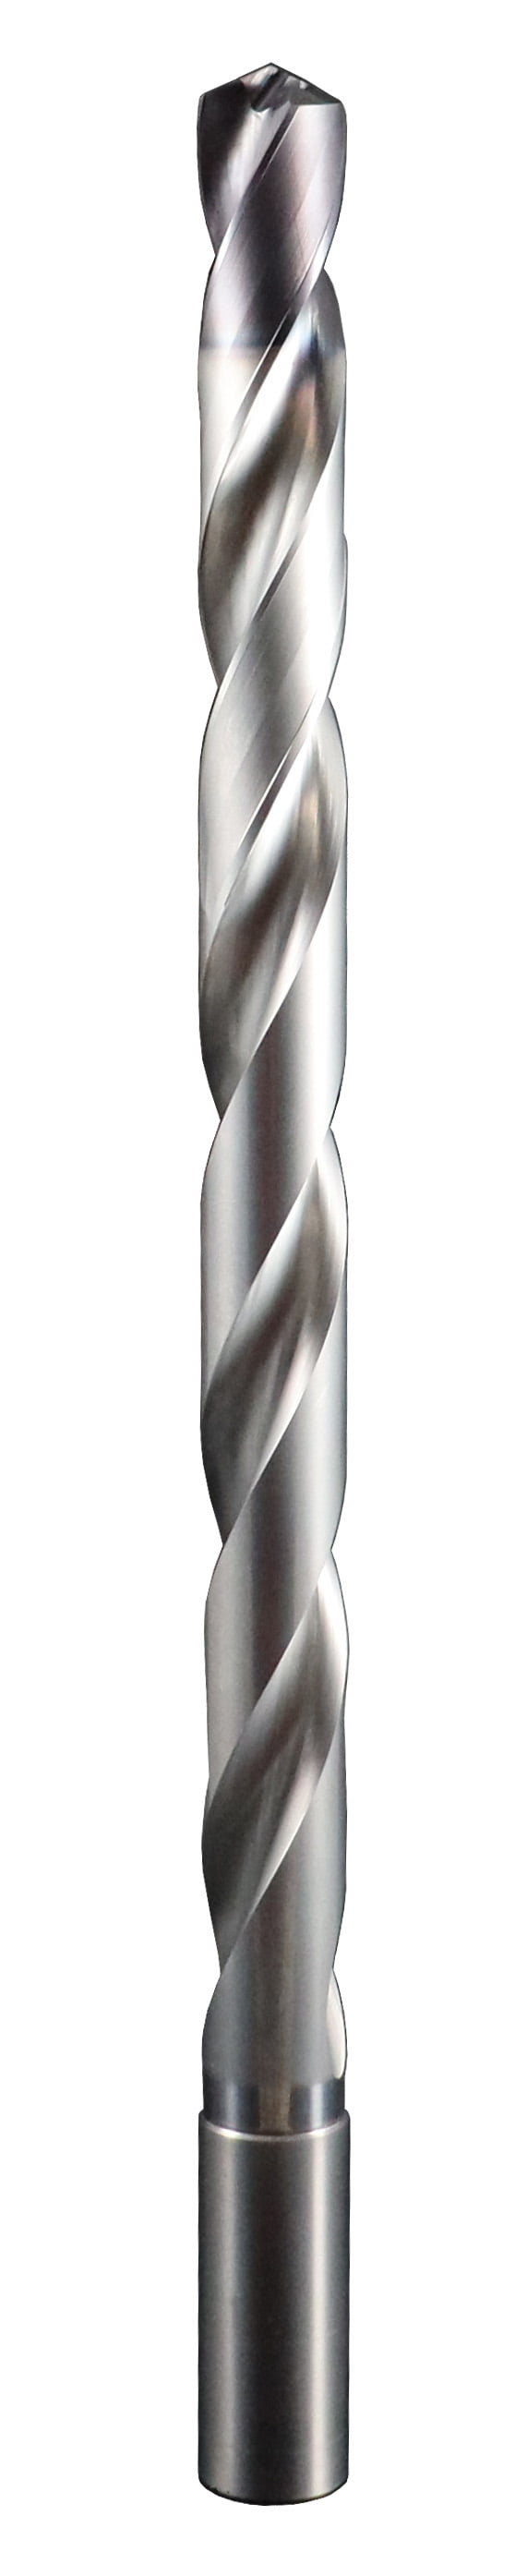 3.20mm Dia, 137 Degree Point, Solid Carbide Drill - 66711